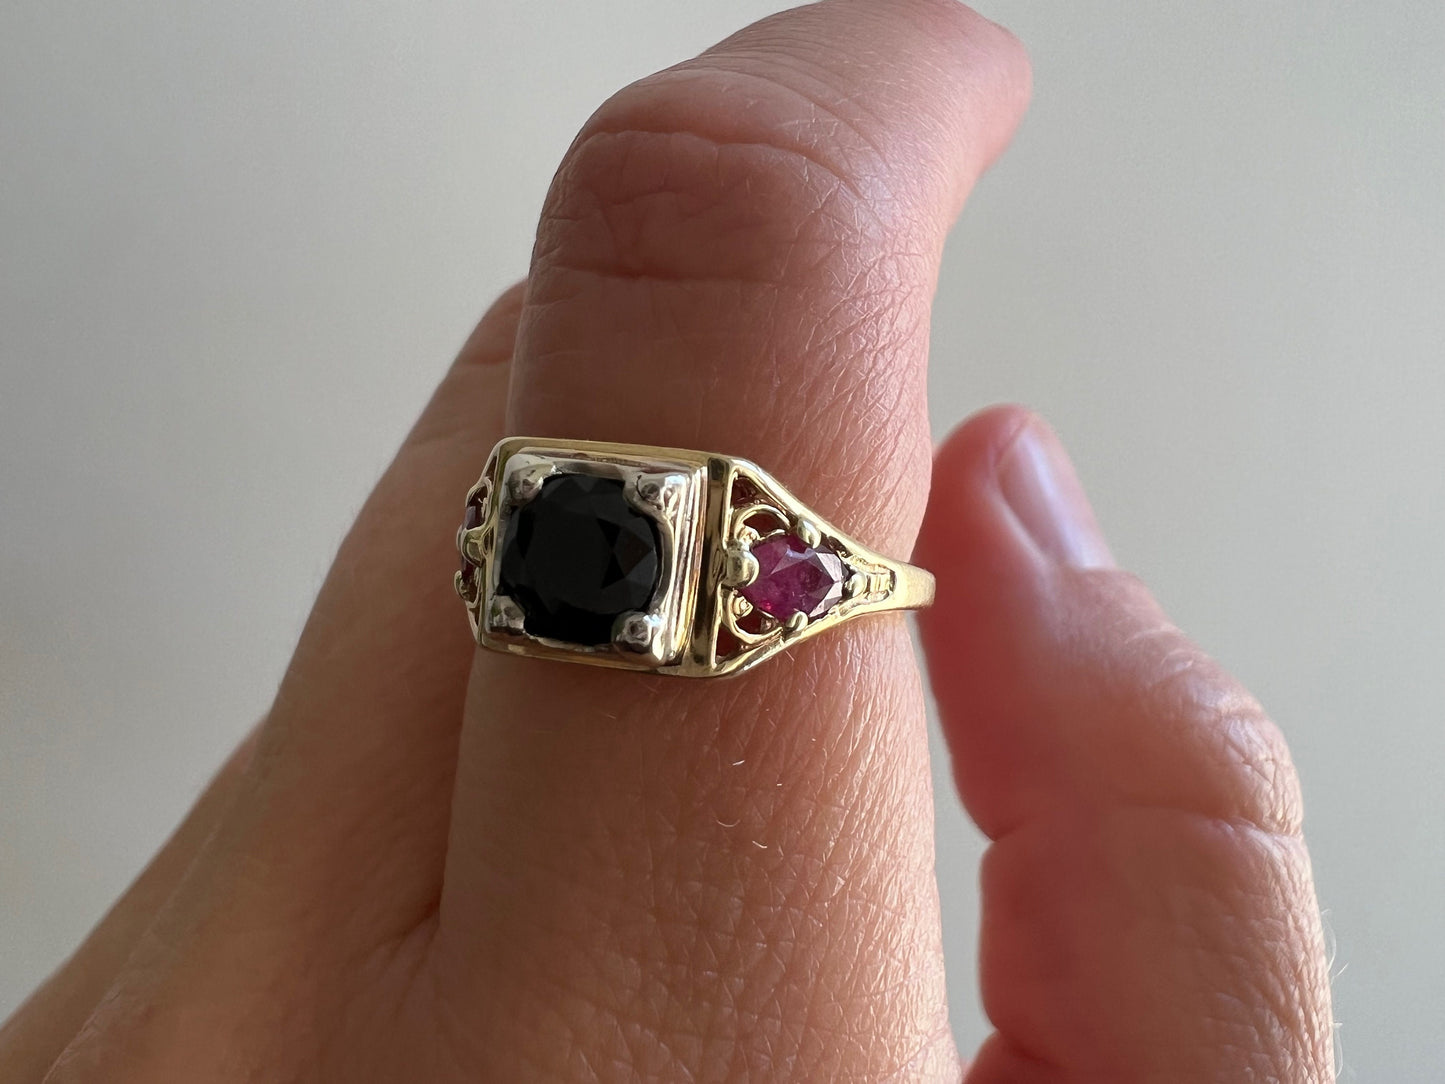 reimagined V I N T A G E // 1960s does 1920s / 14k deco revival engagement ring / yellow and white gold with black onyx and rubies / size 5